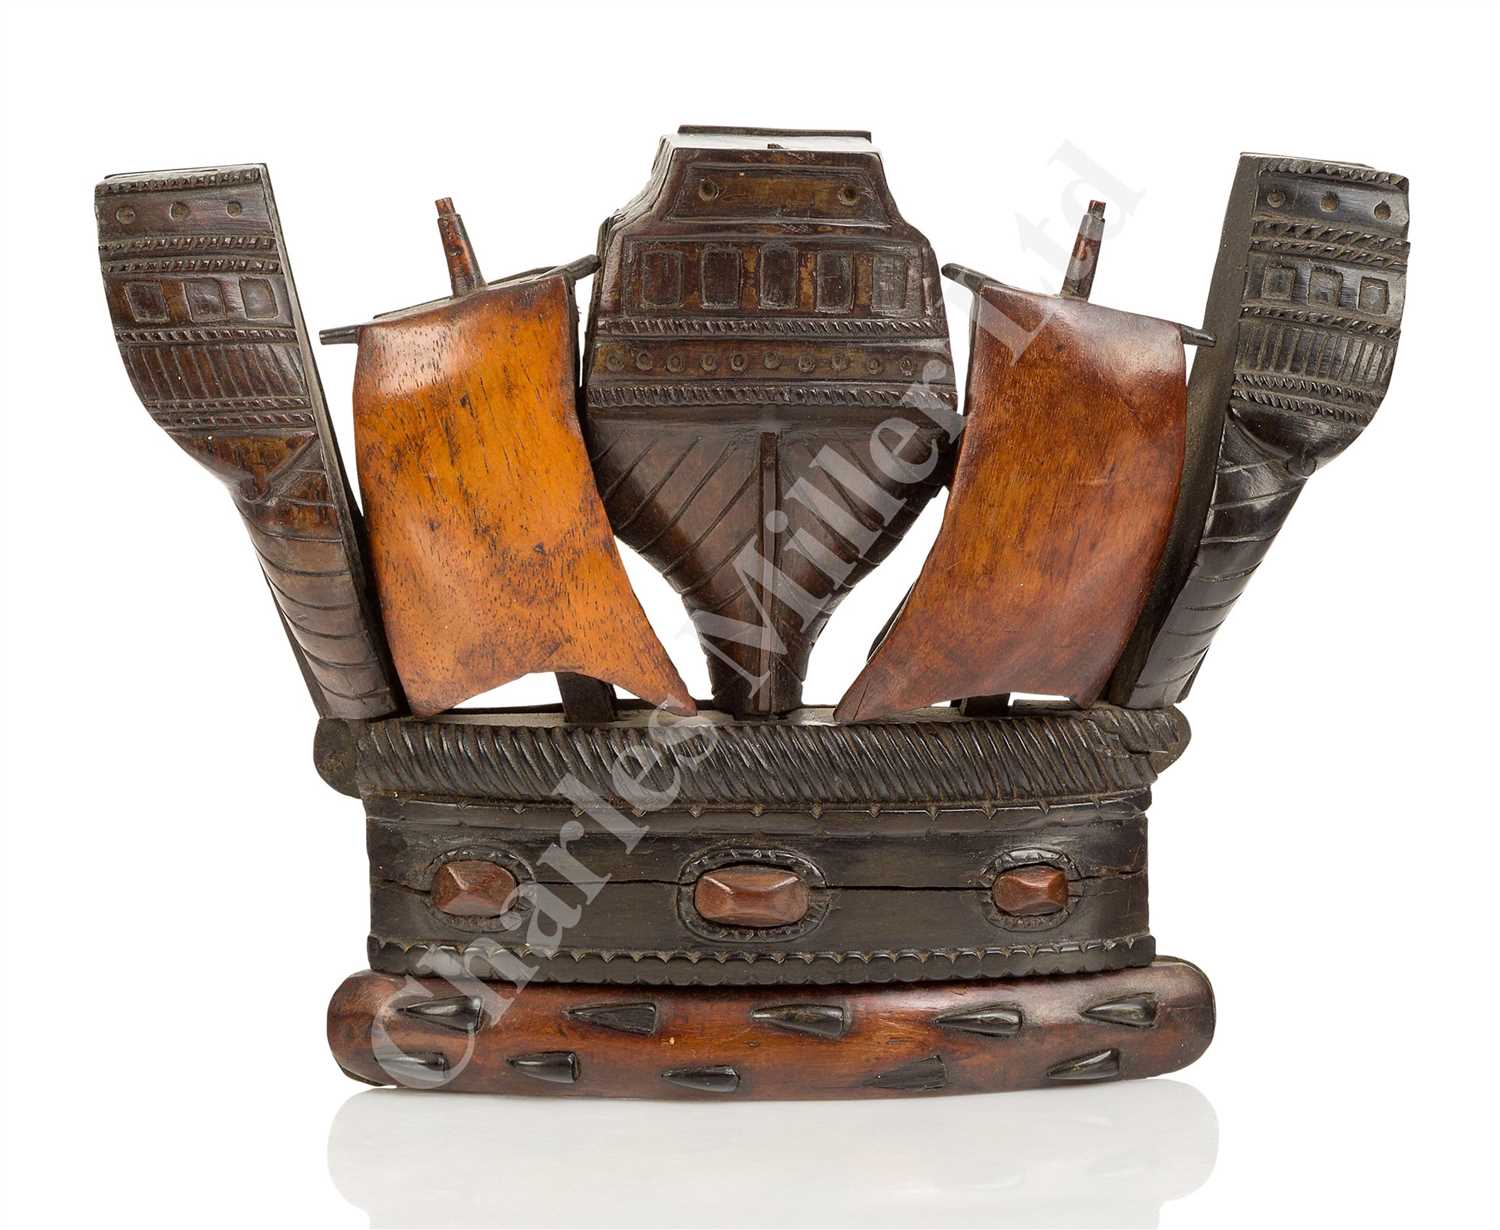 Lot 66 - A 19TH CENTURY NAVAL CROWN CONSTRUCTED FROM TIMBER AND COPPER RECOVERED FROM H.M.S. VICTORY